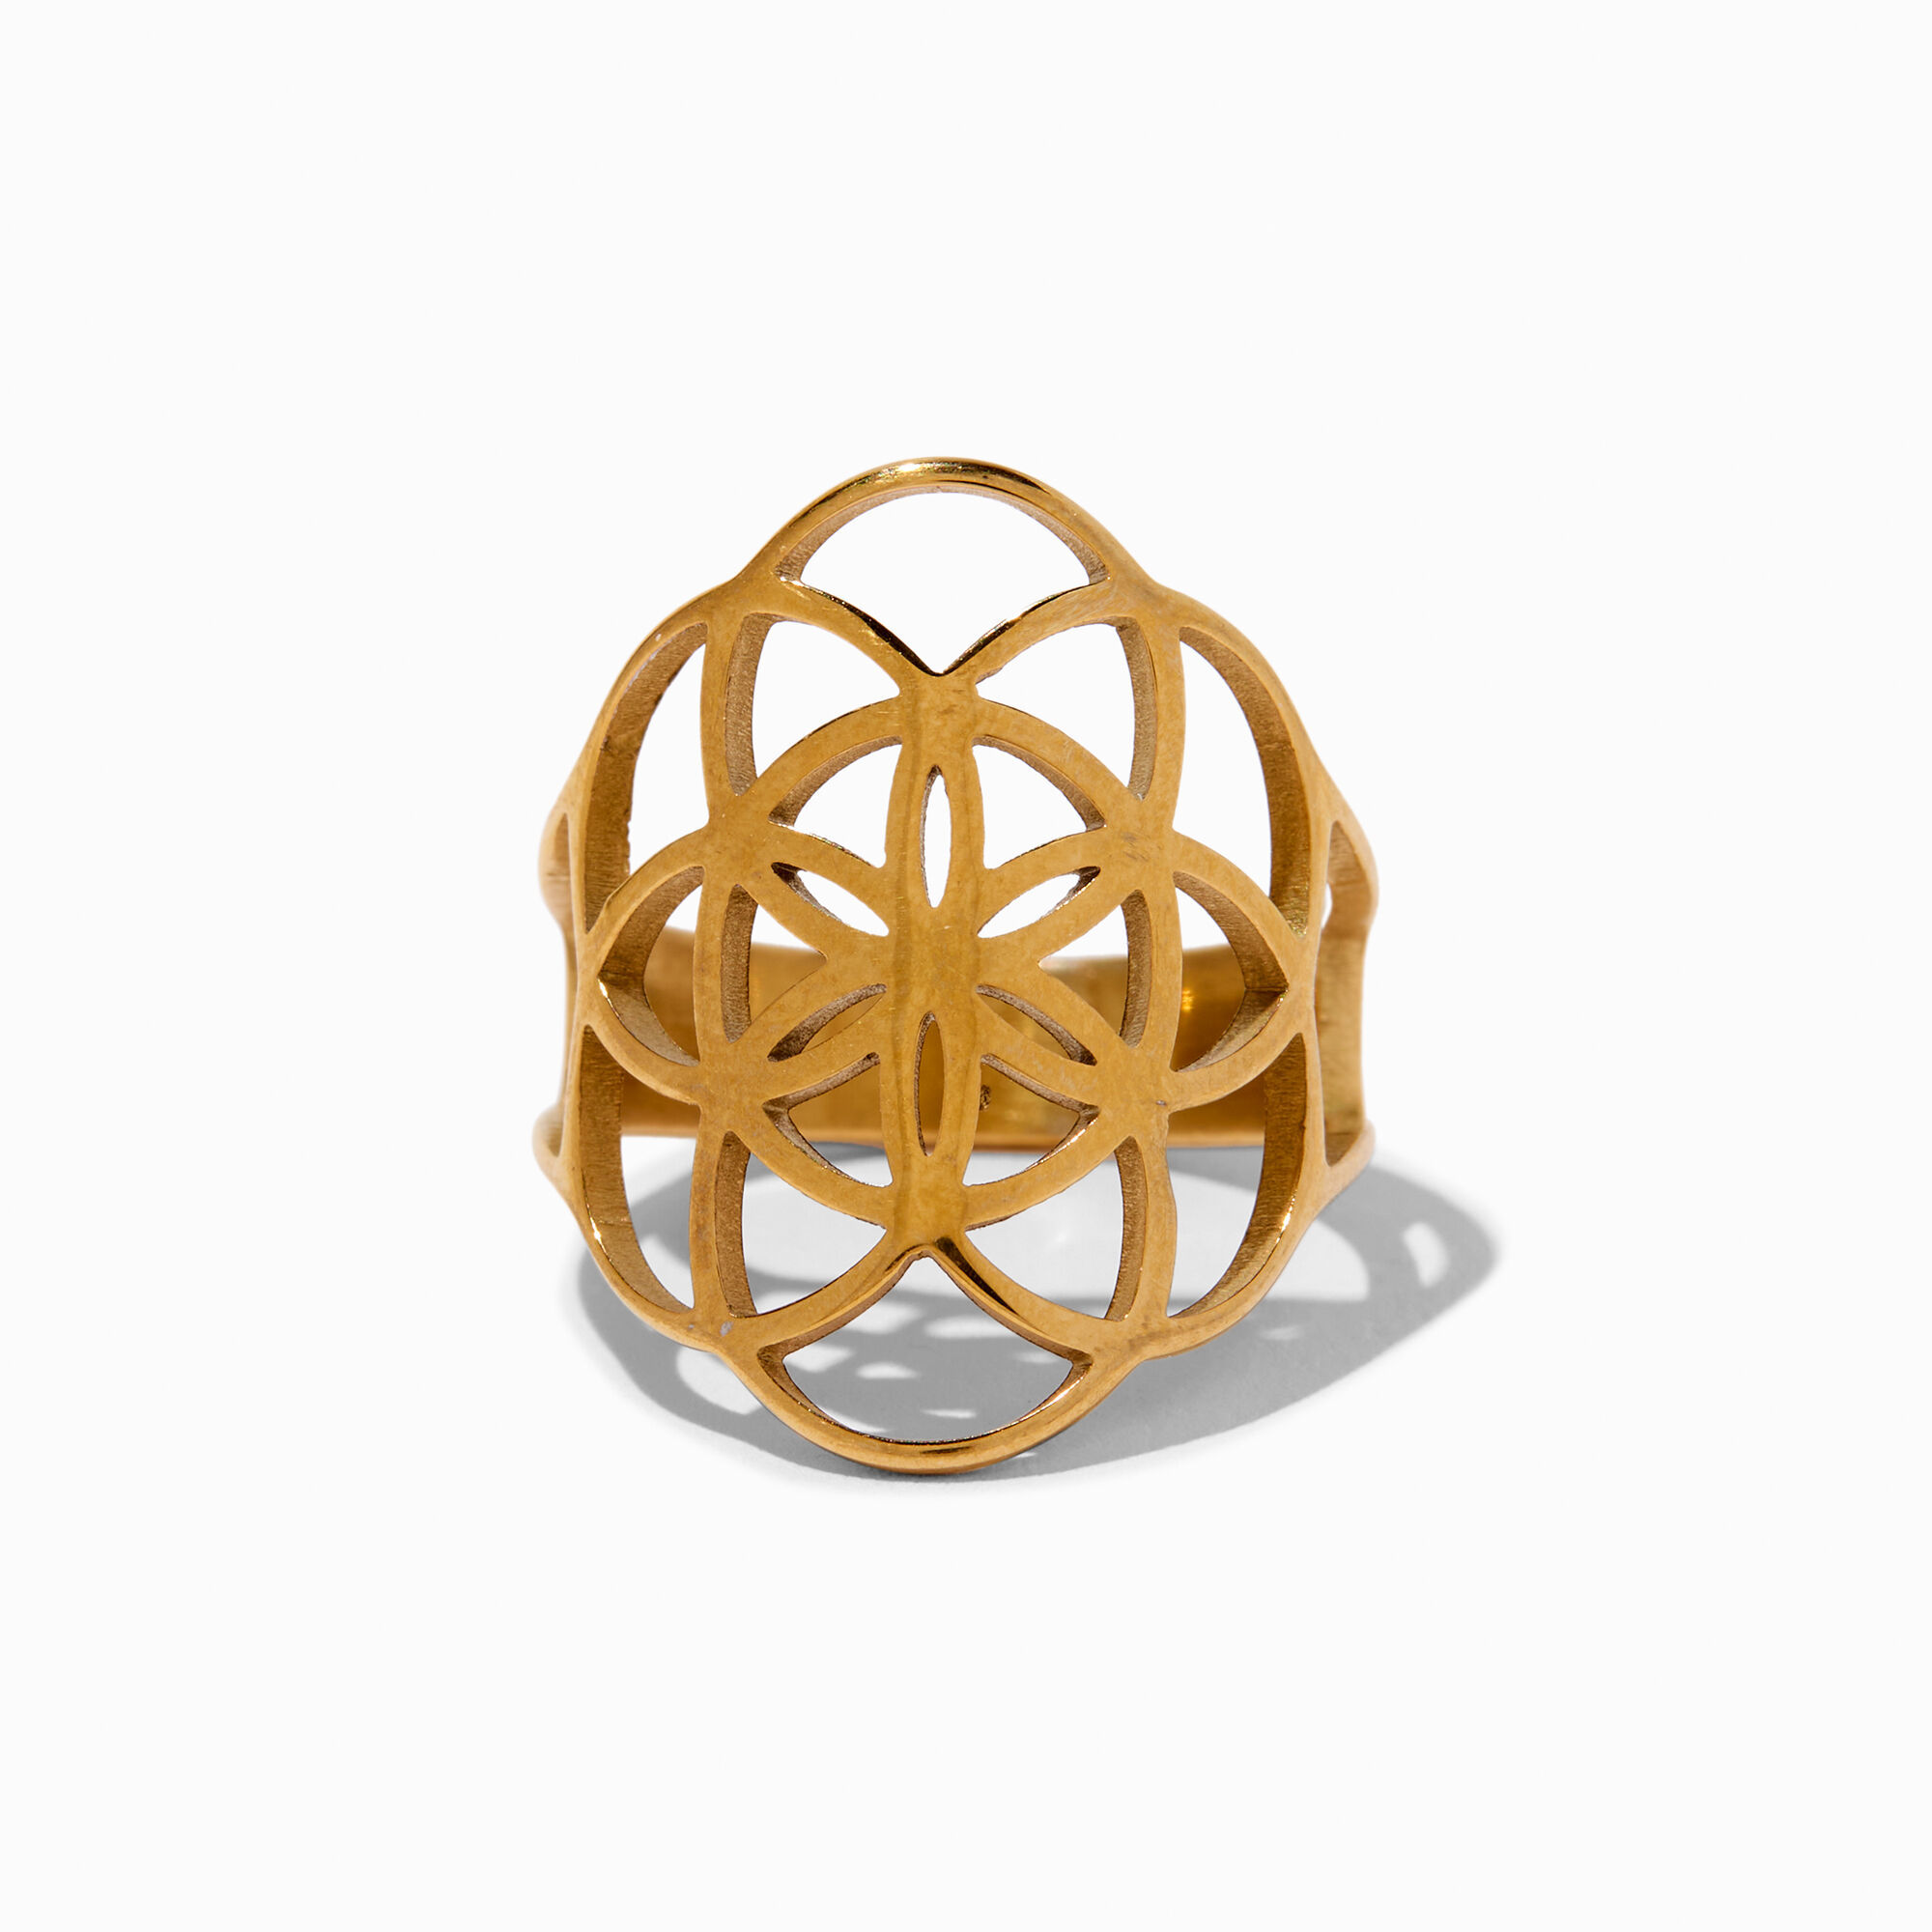 View Claires Tone Stainless Steel Geometric Floral Ring Gold information